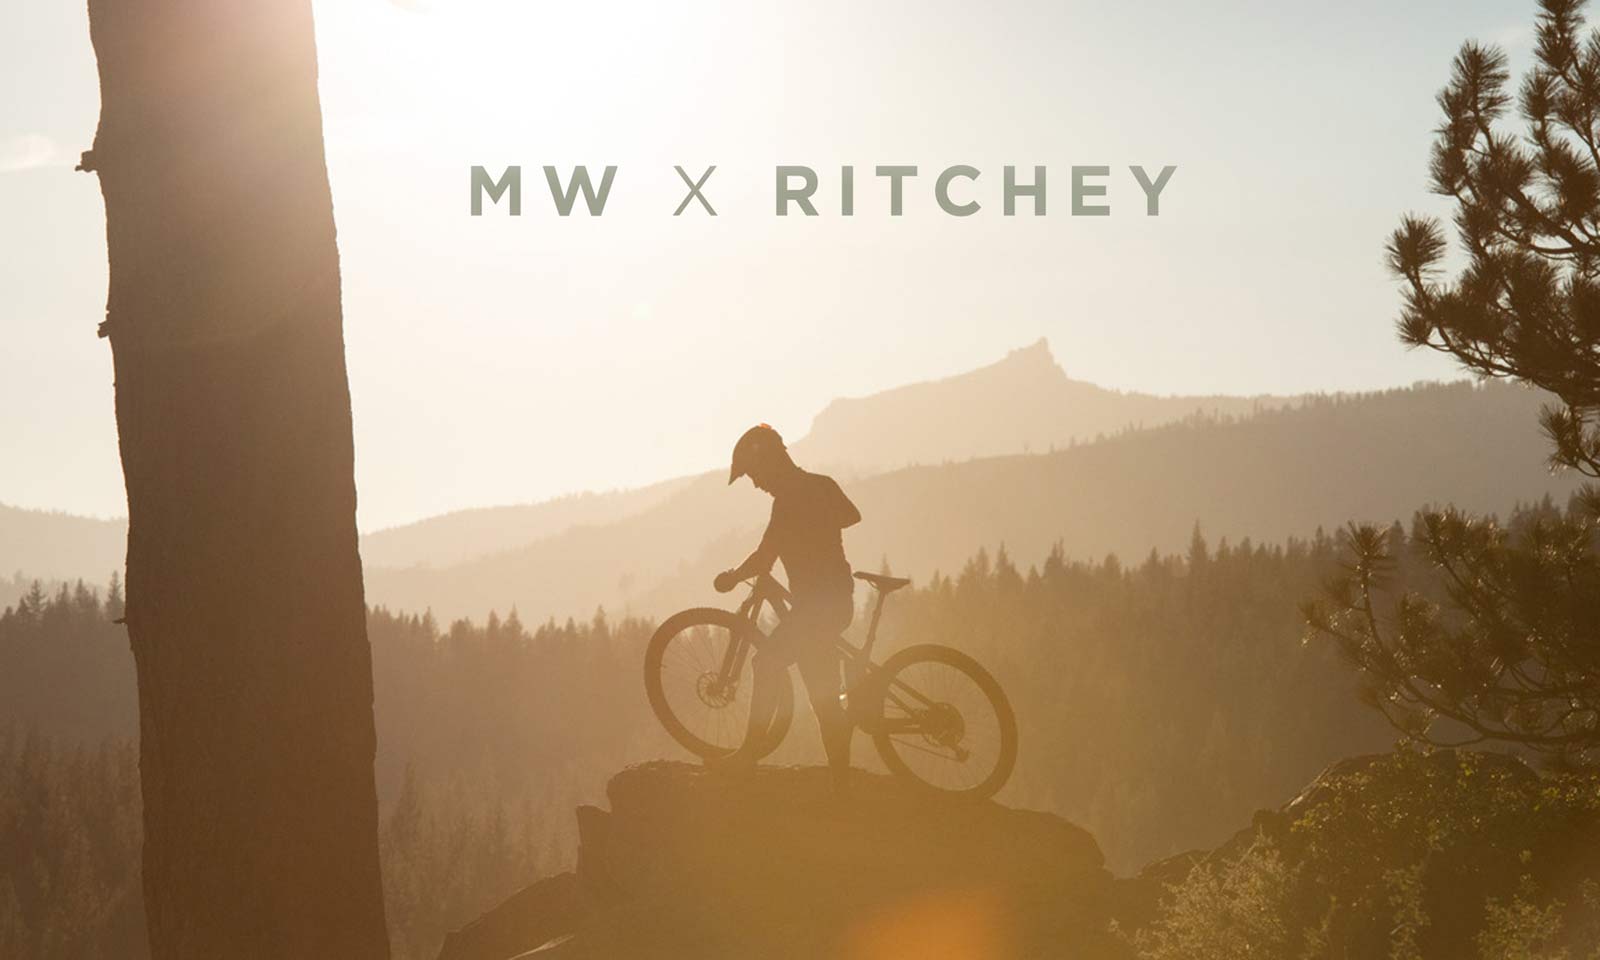 Friday Roundup: Win a trip to Tahoe, Crankworx home at Whistler, Detroit, Rapha deals & more!